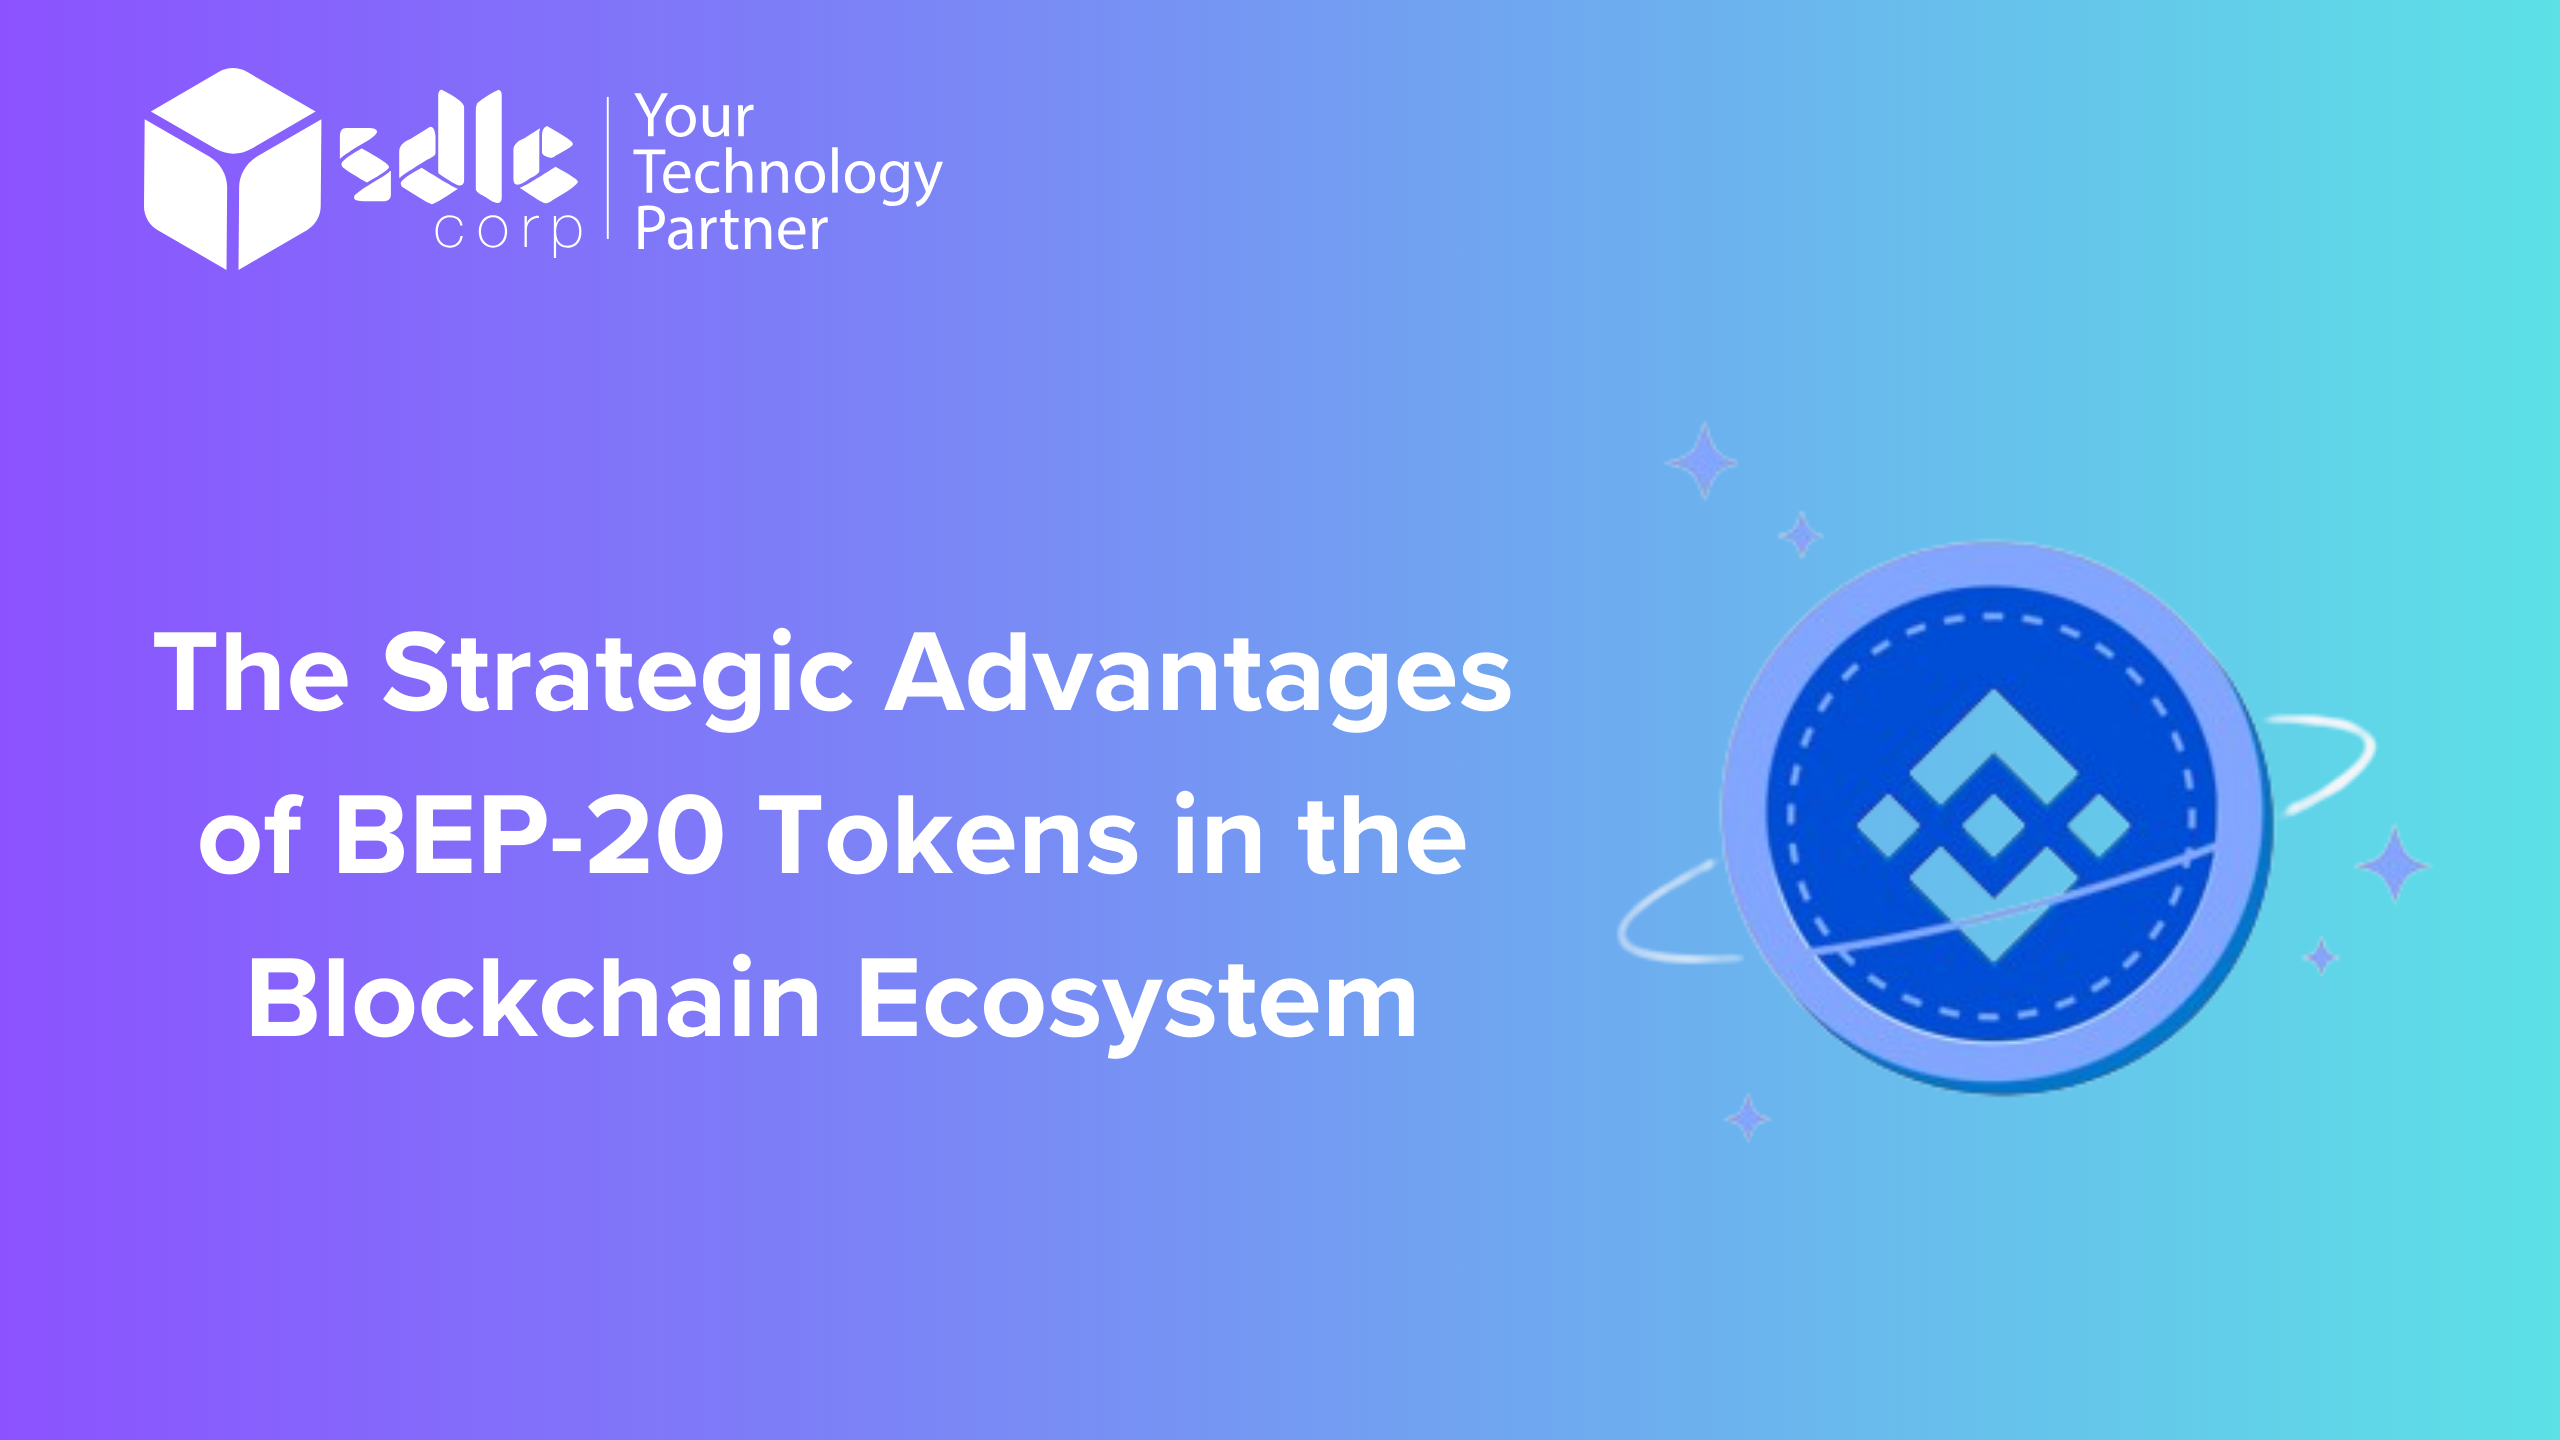 The Strategic Advantages of BEP-20 Tokens in the Blockchain Ecosystem